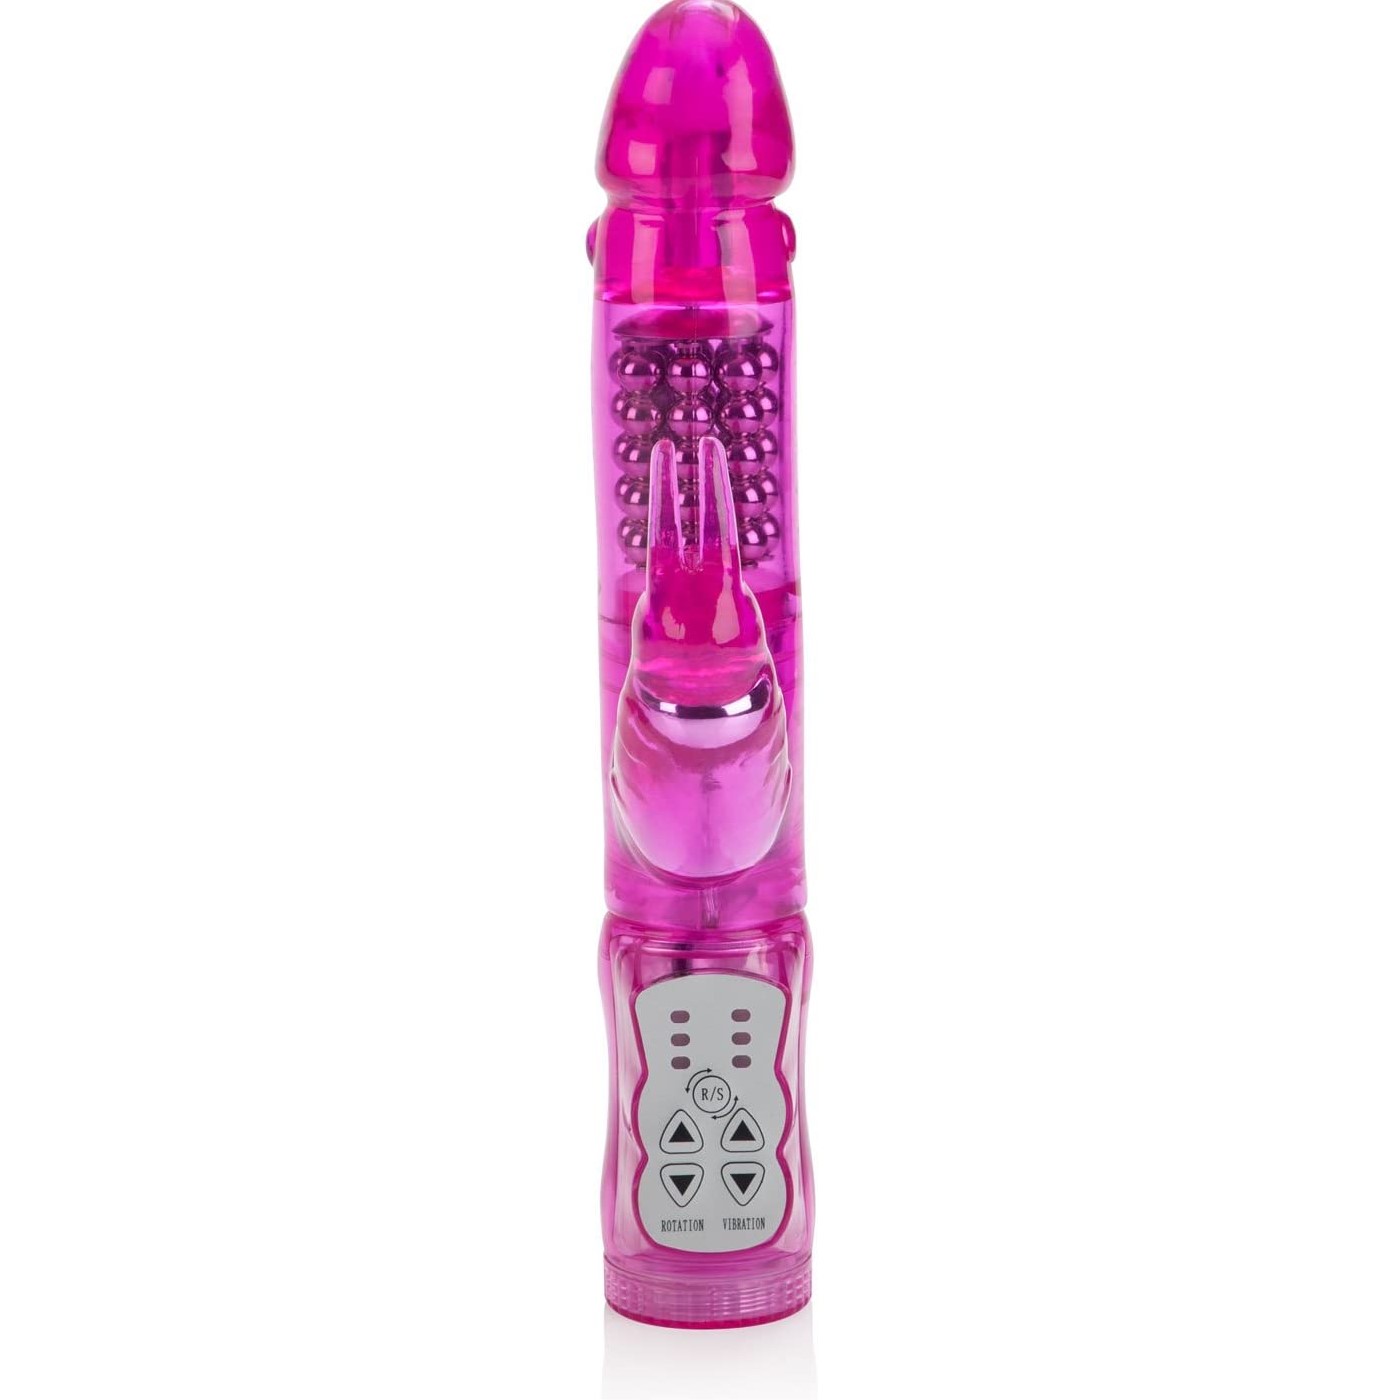 Rabbit Vibrator With Rotating Shaft Vibe Sex Toys for Couples Adult Clitoral and G Spot Massager Pink VibratorToyX